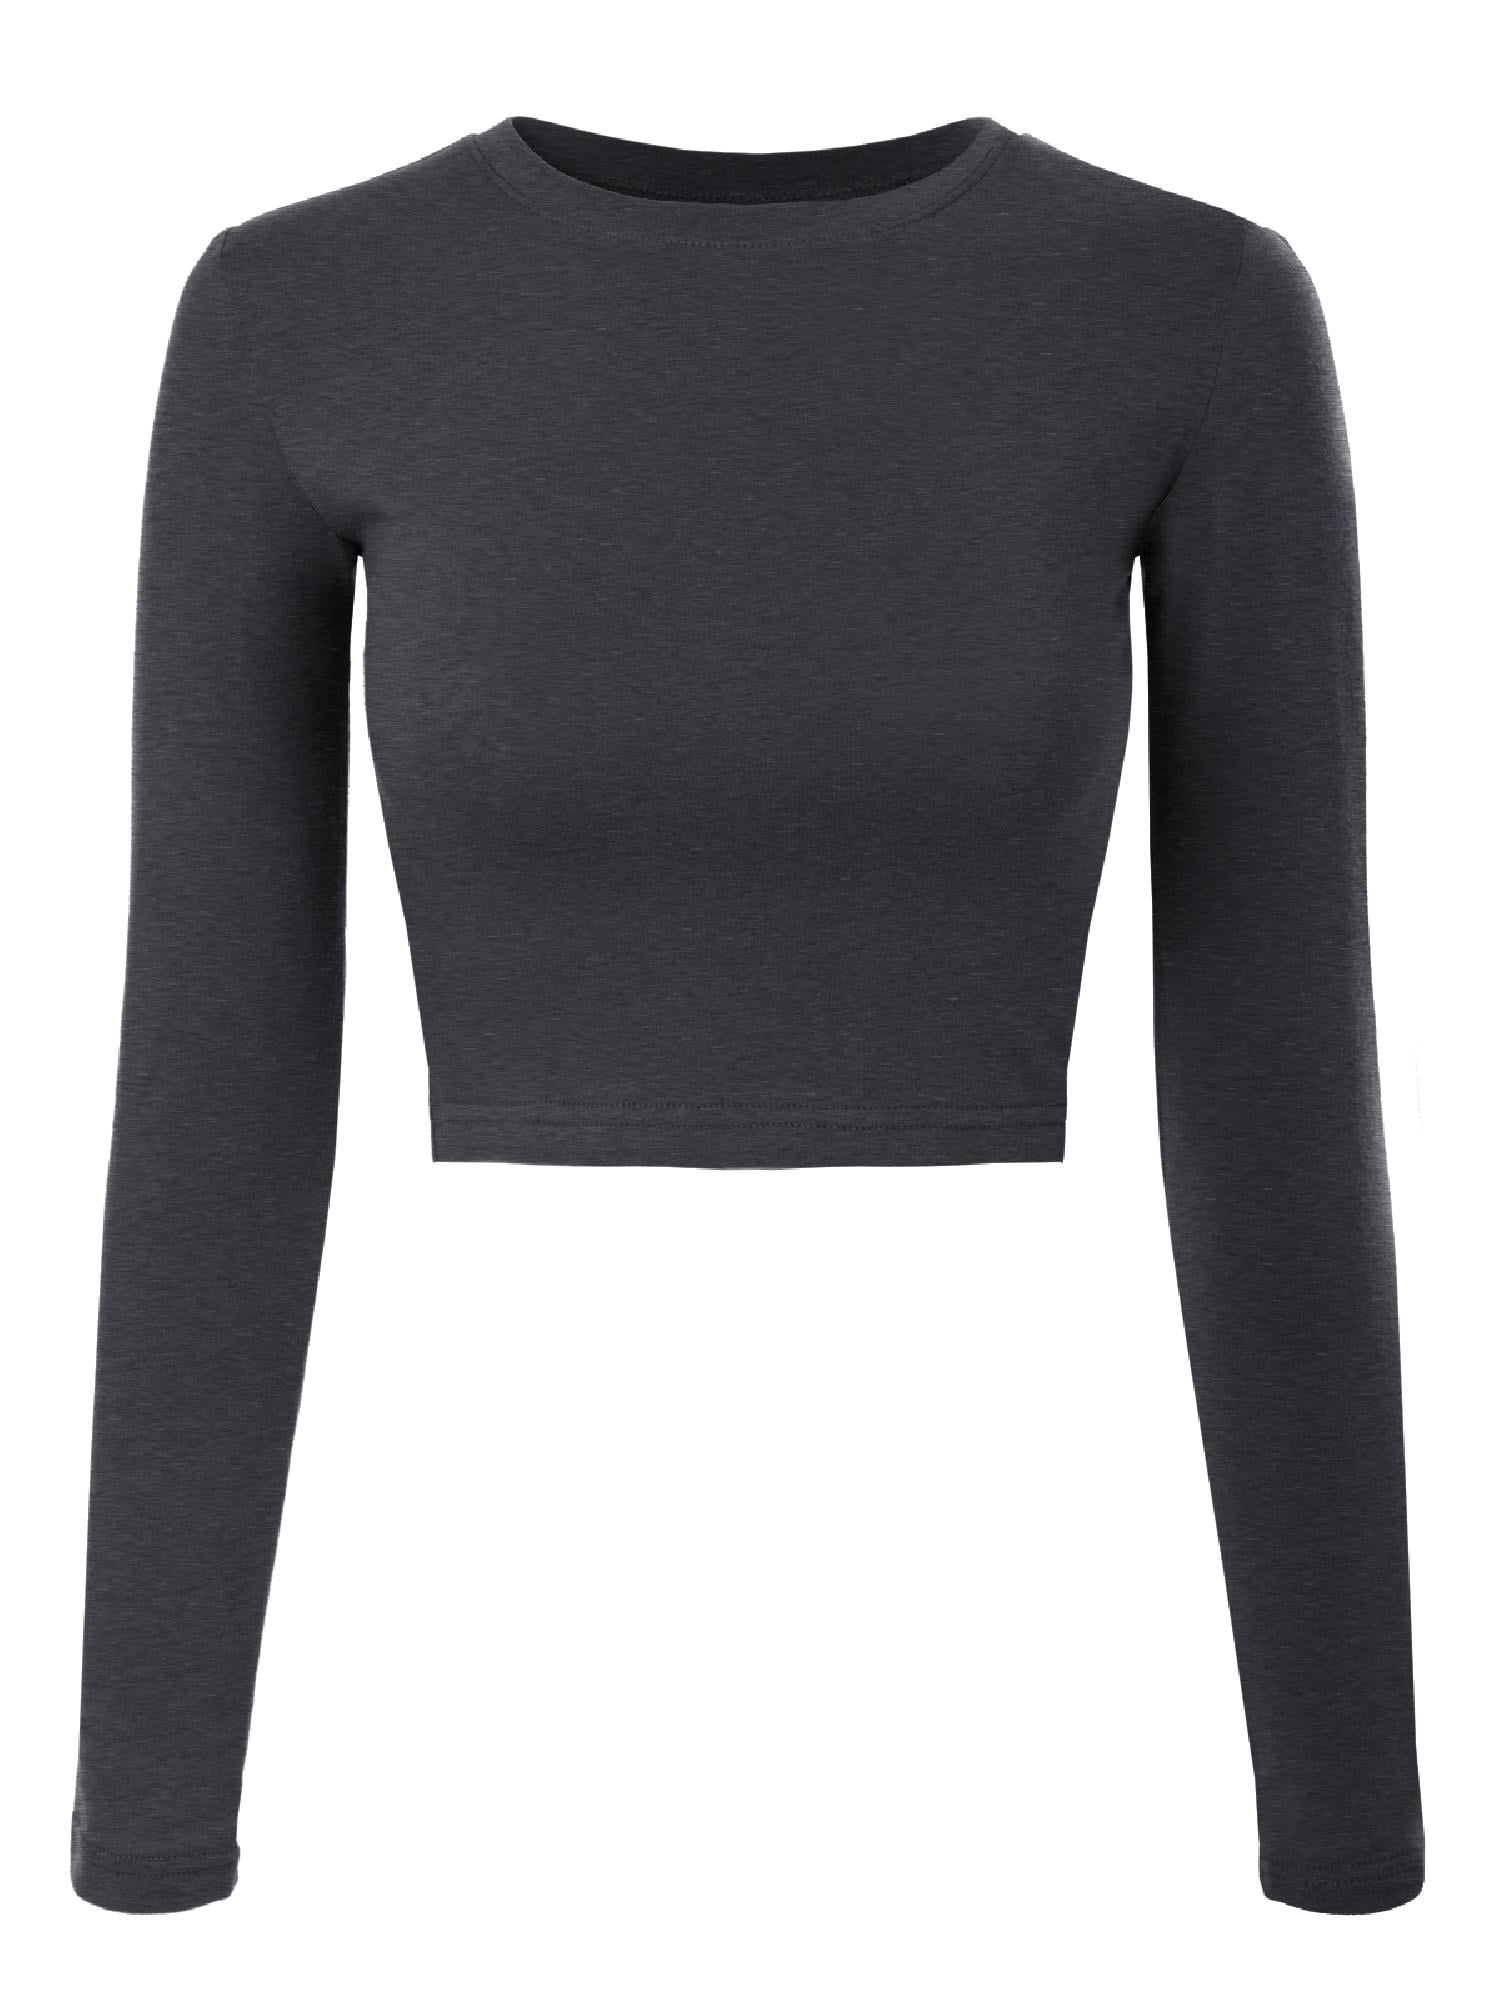 Made by Olivia Women's Solid Long Sleeve Round Neck Crop T Shirt Top 